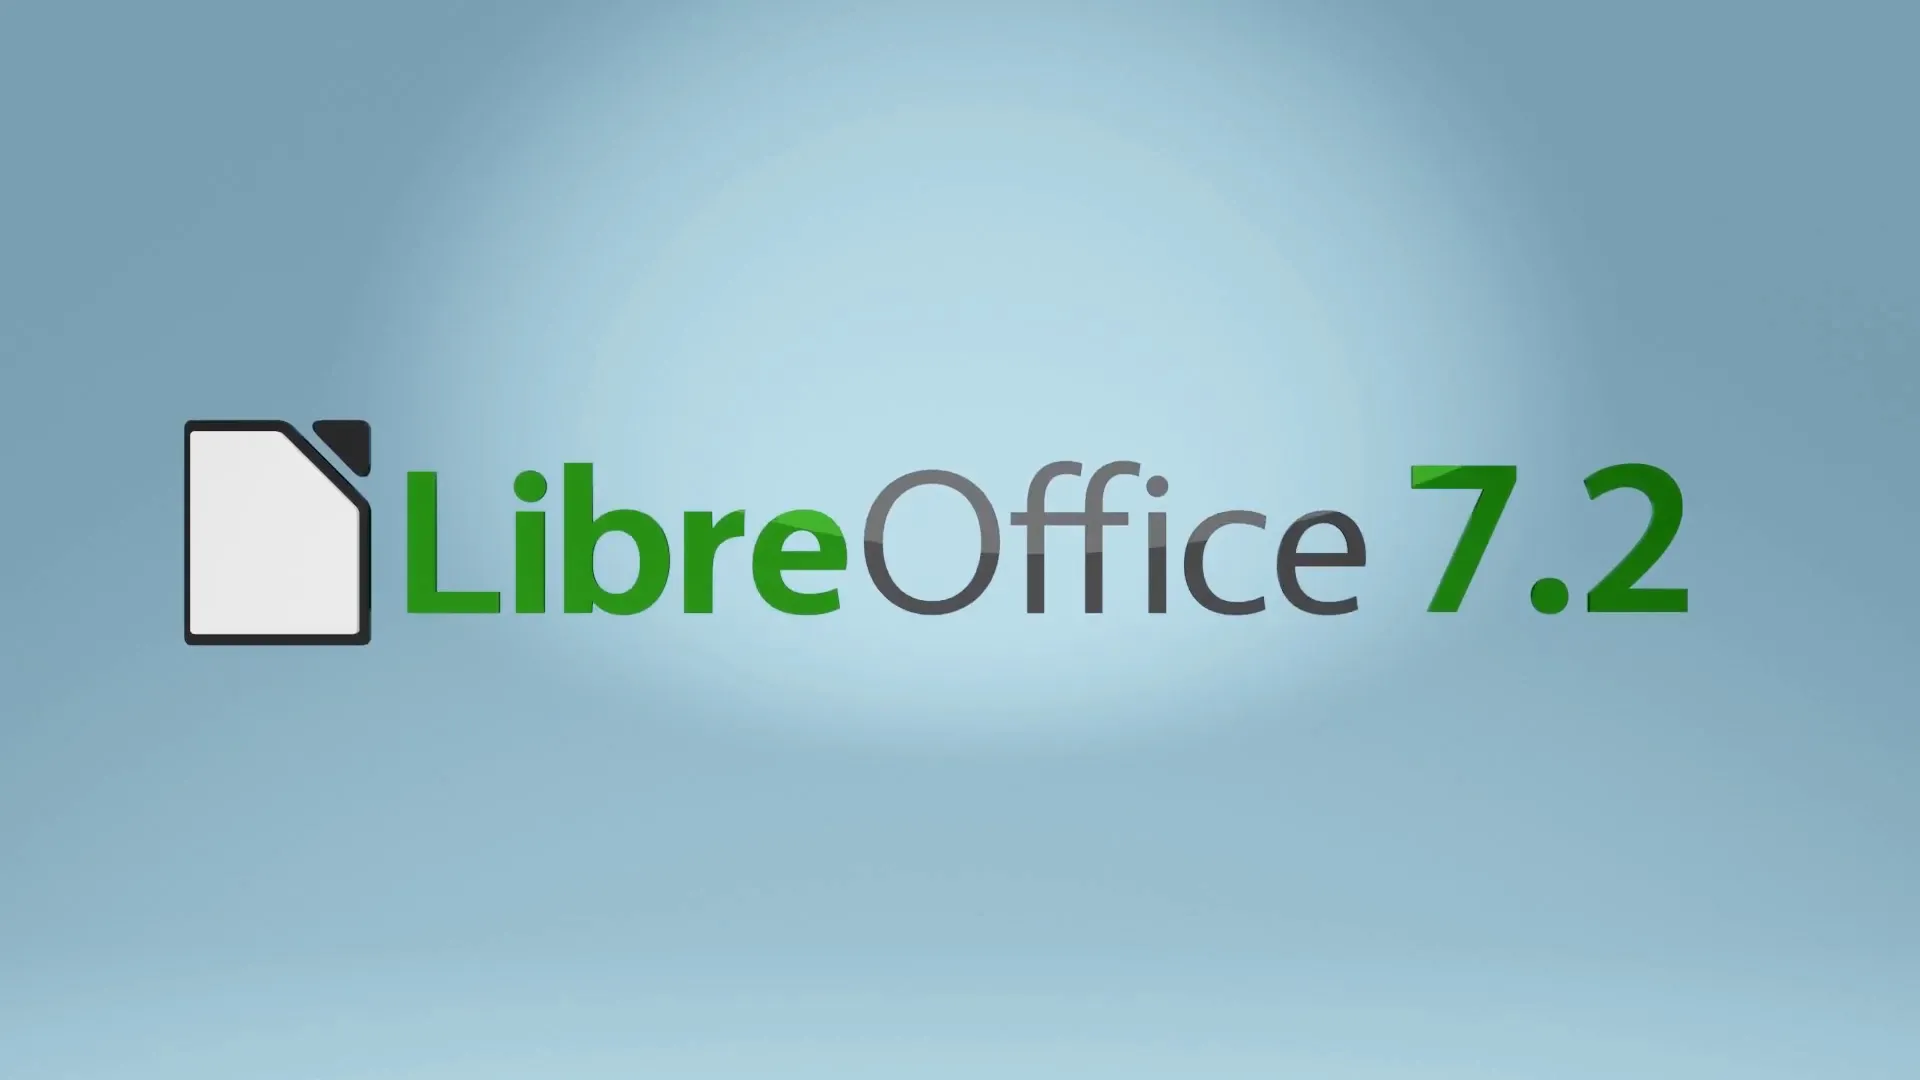 LibreOffice 7.2.2 Community Released with 68 Bug Fixes, Update Now